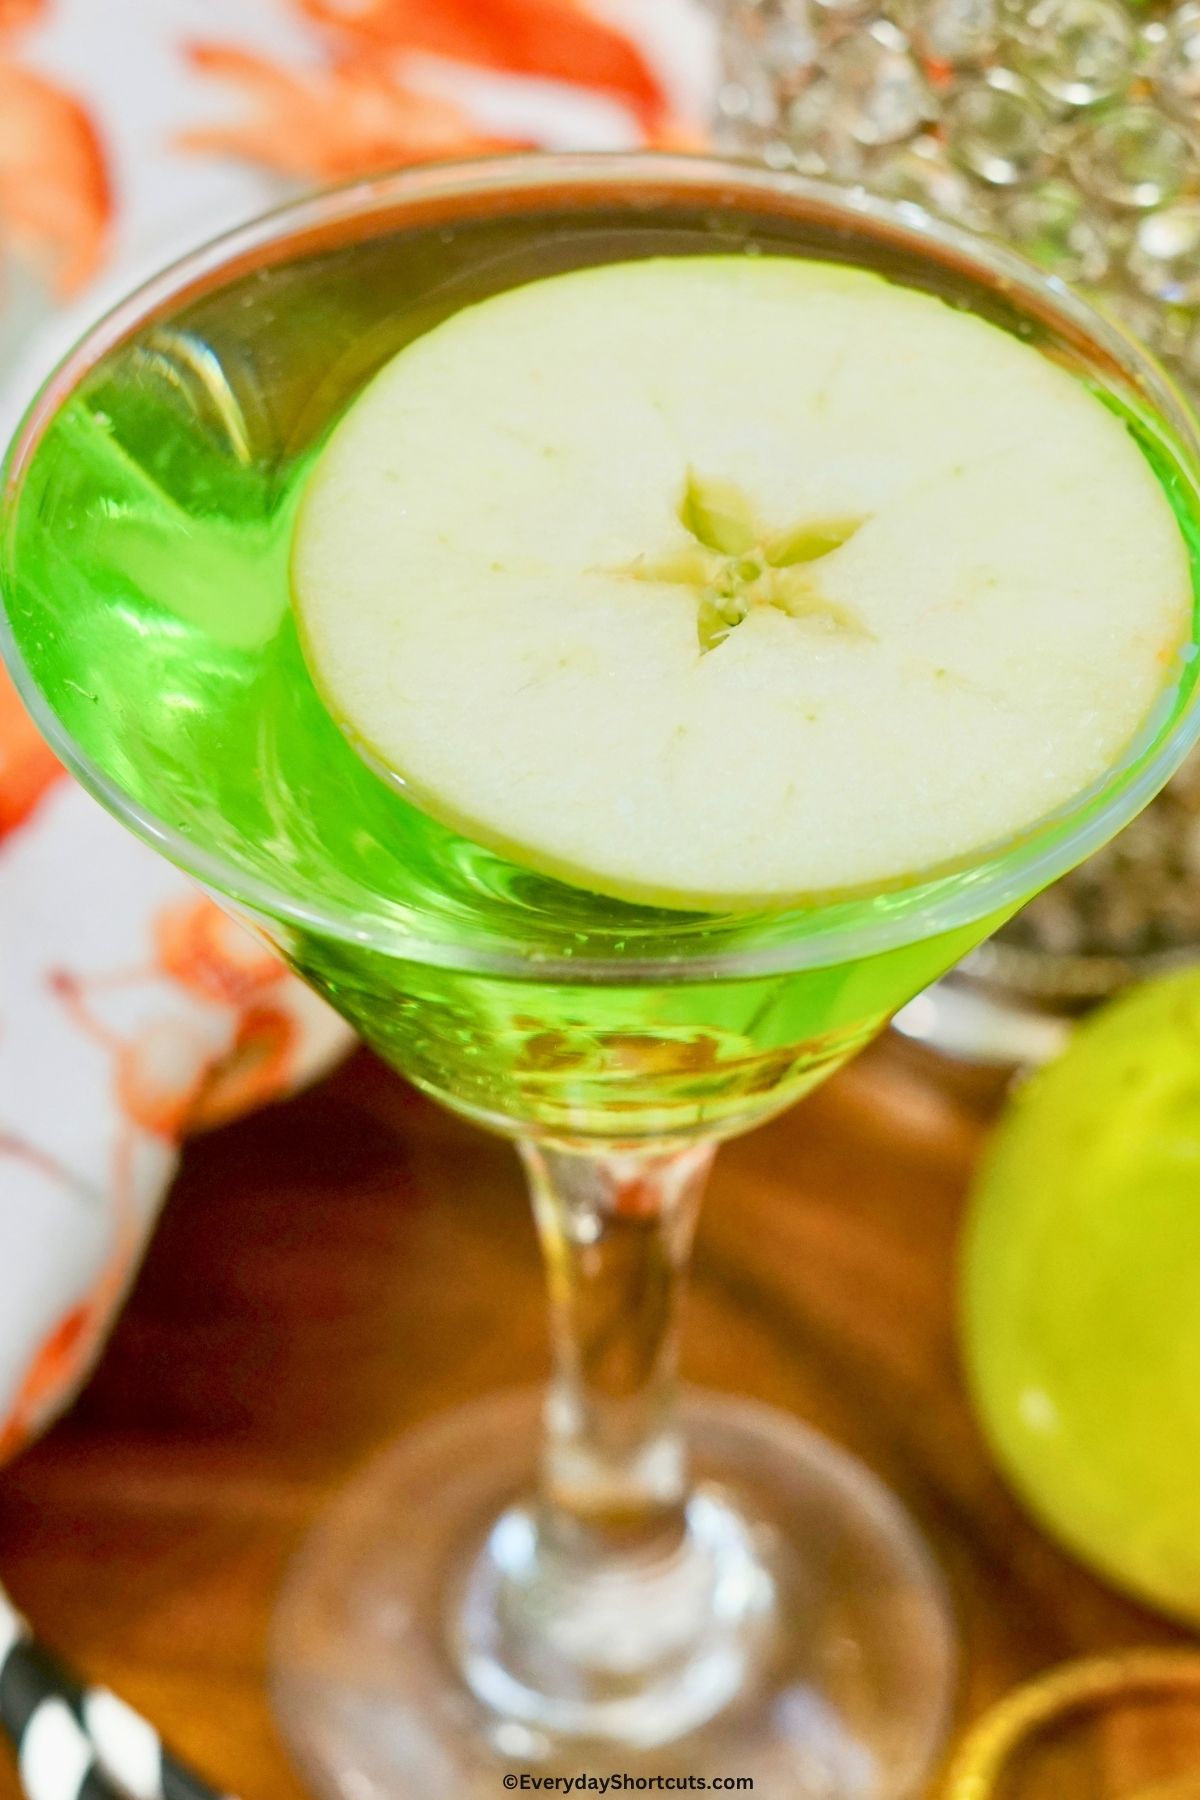 appletini garnished with an apple slice